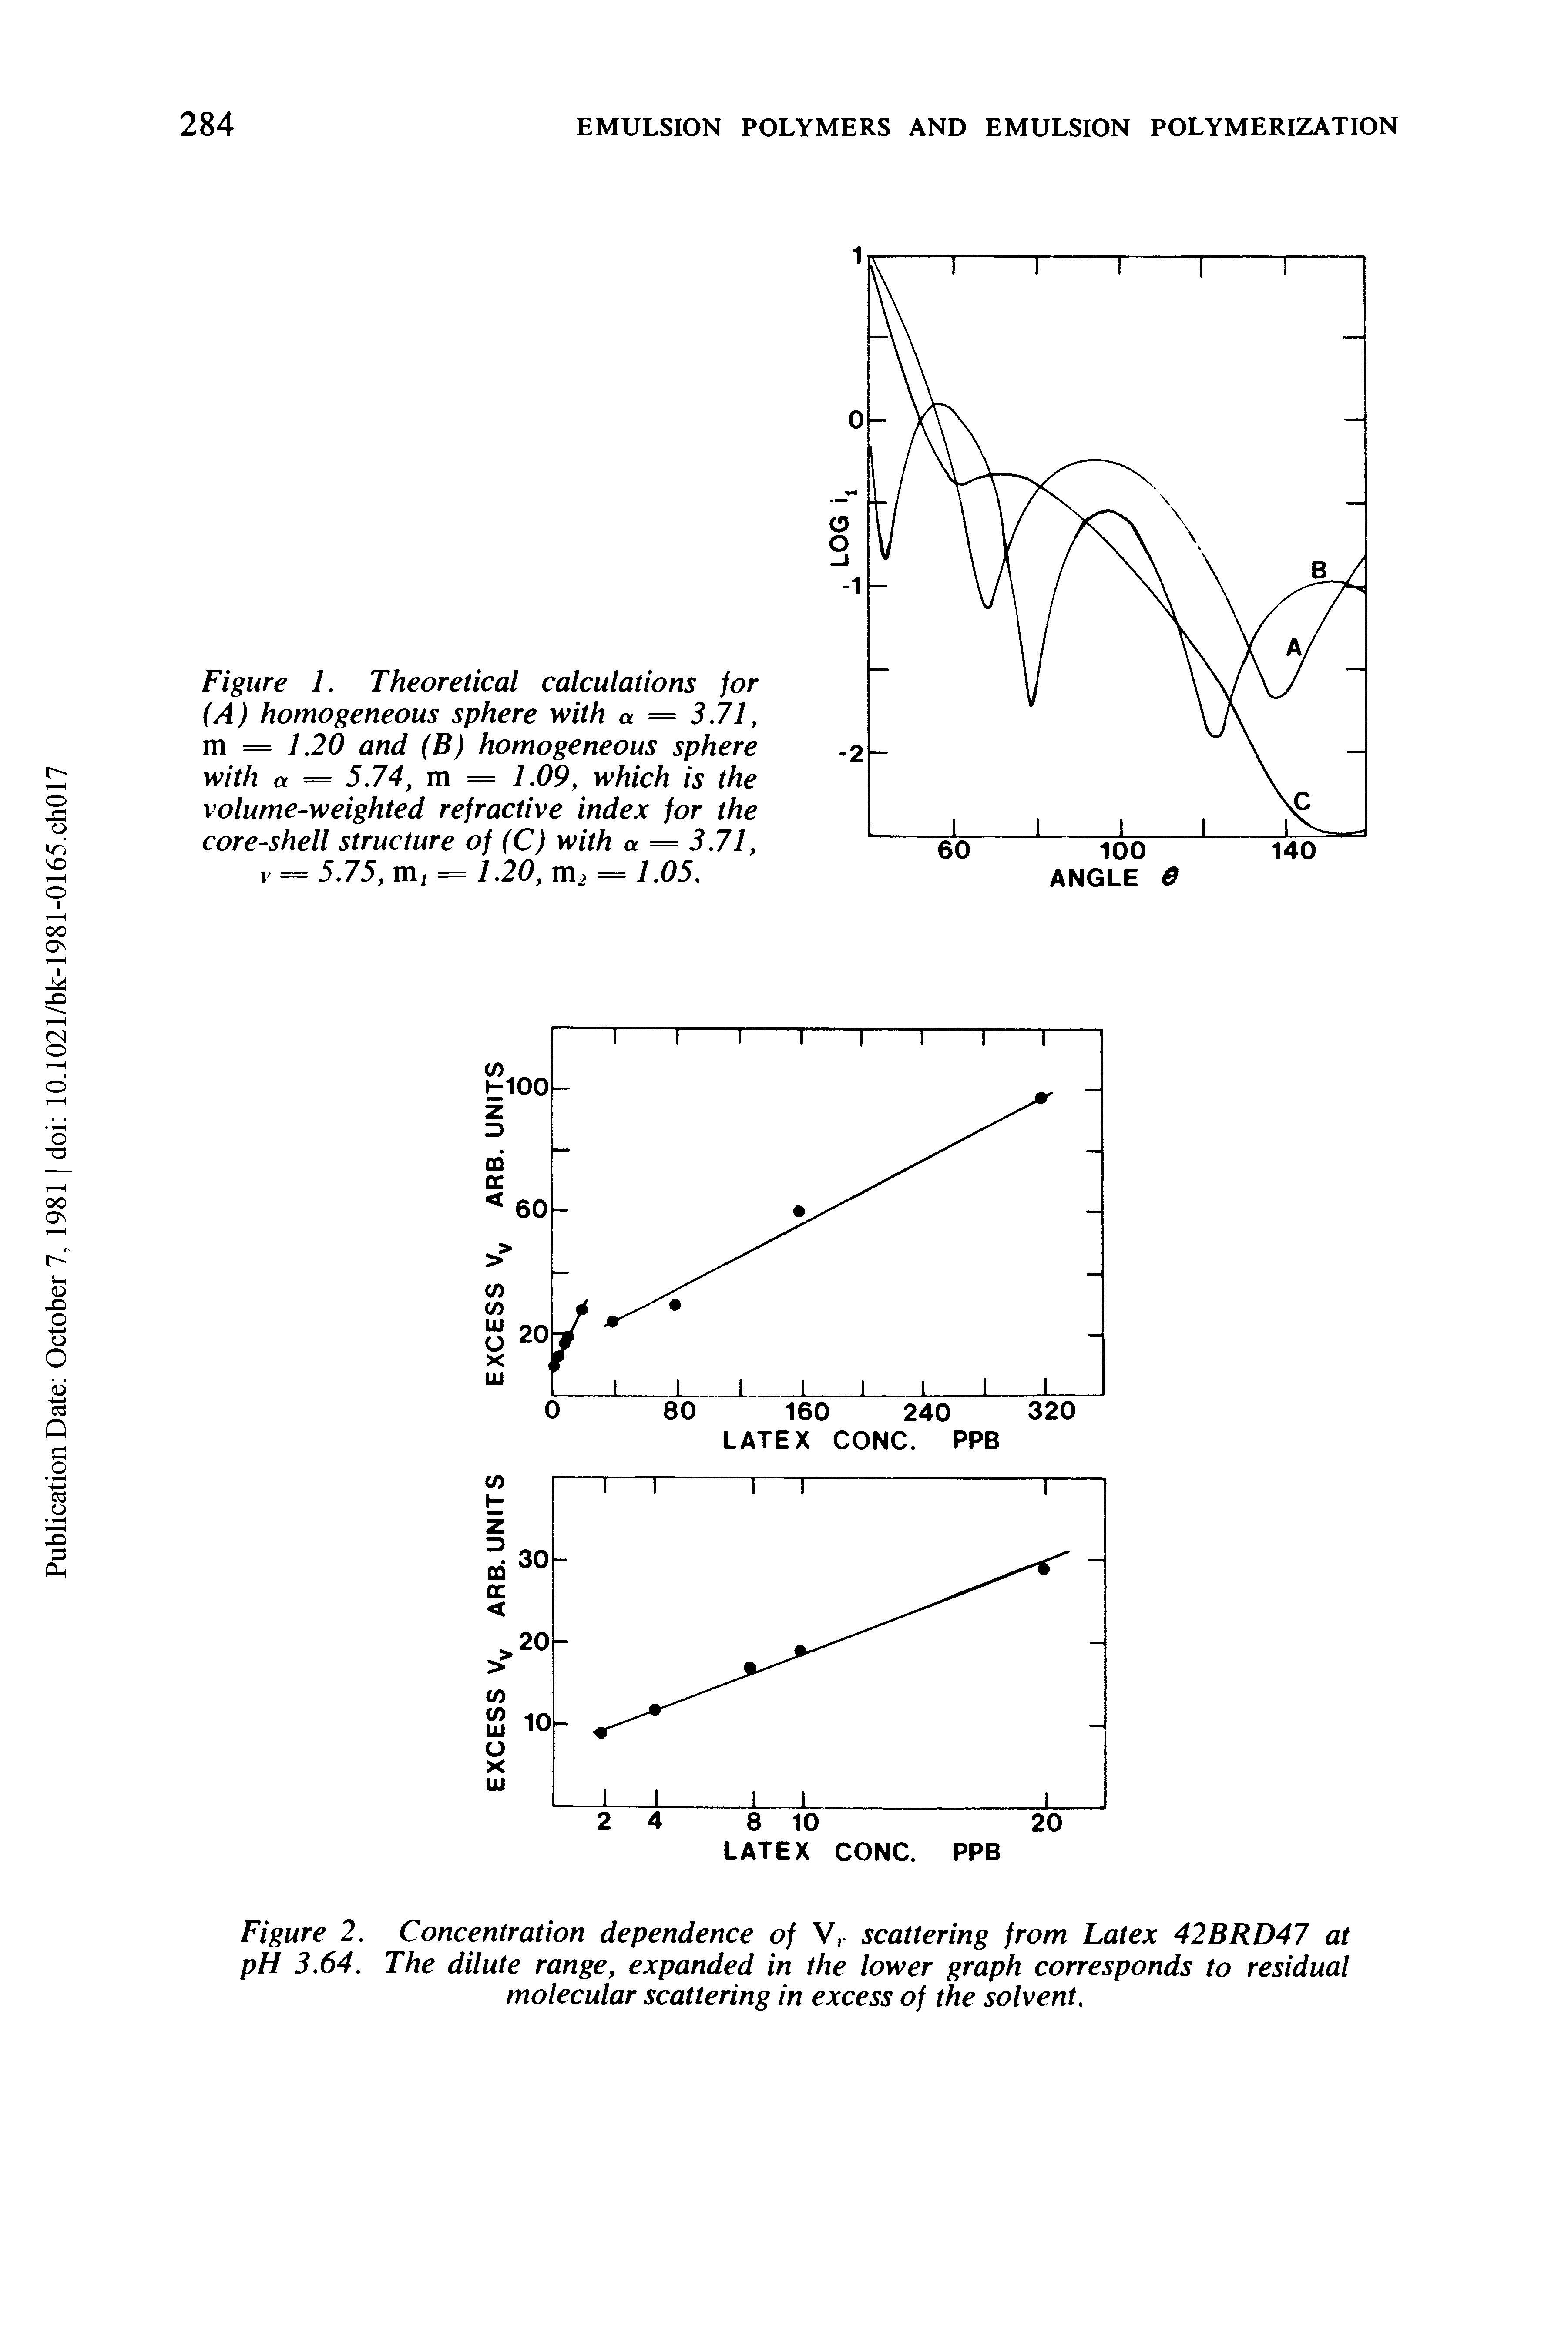 Figure 1. Theoretical calculations for (A) homogeneous sphere with a = 3.71, m = 1.20 and (B) homogeneous sphere with a = 5.74, m = 1.09, which is the volume-weighted refractive index for the core-shell structure of (C) with a = 3.71, V = 5.75, m, = 1.20, m2 = 1.05.